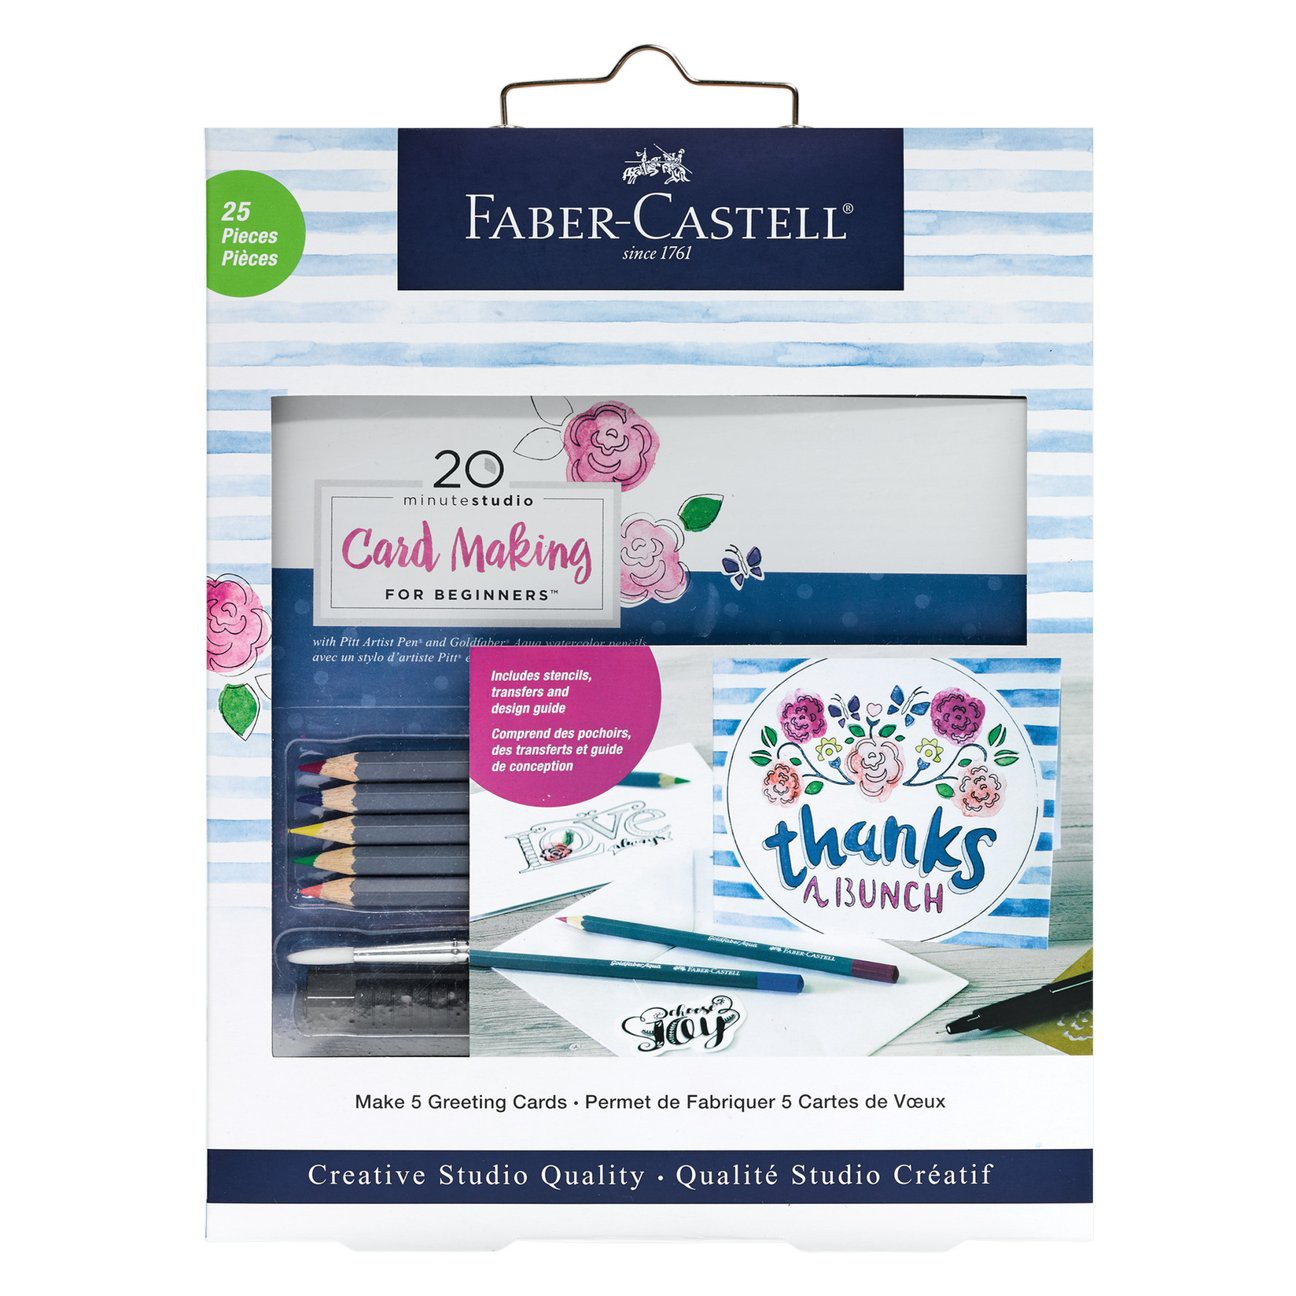 20 minute studio - Card Making FOR BEGINNERS Faber-Castell